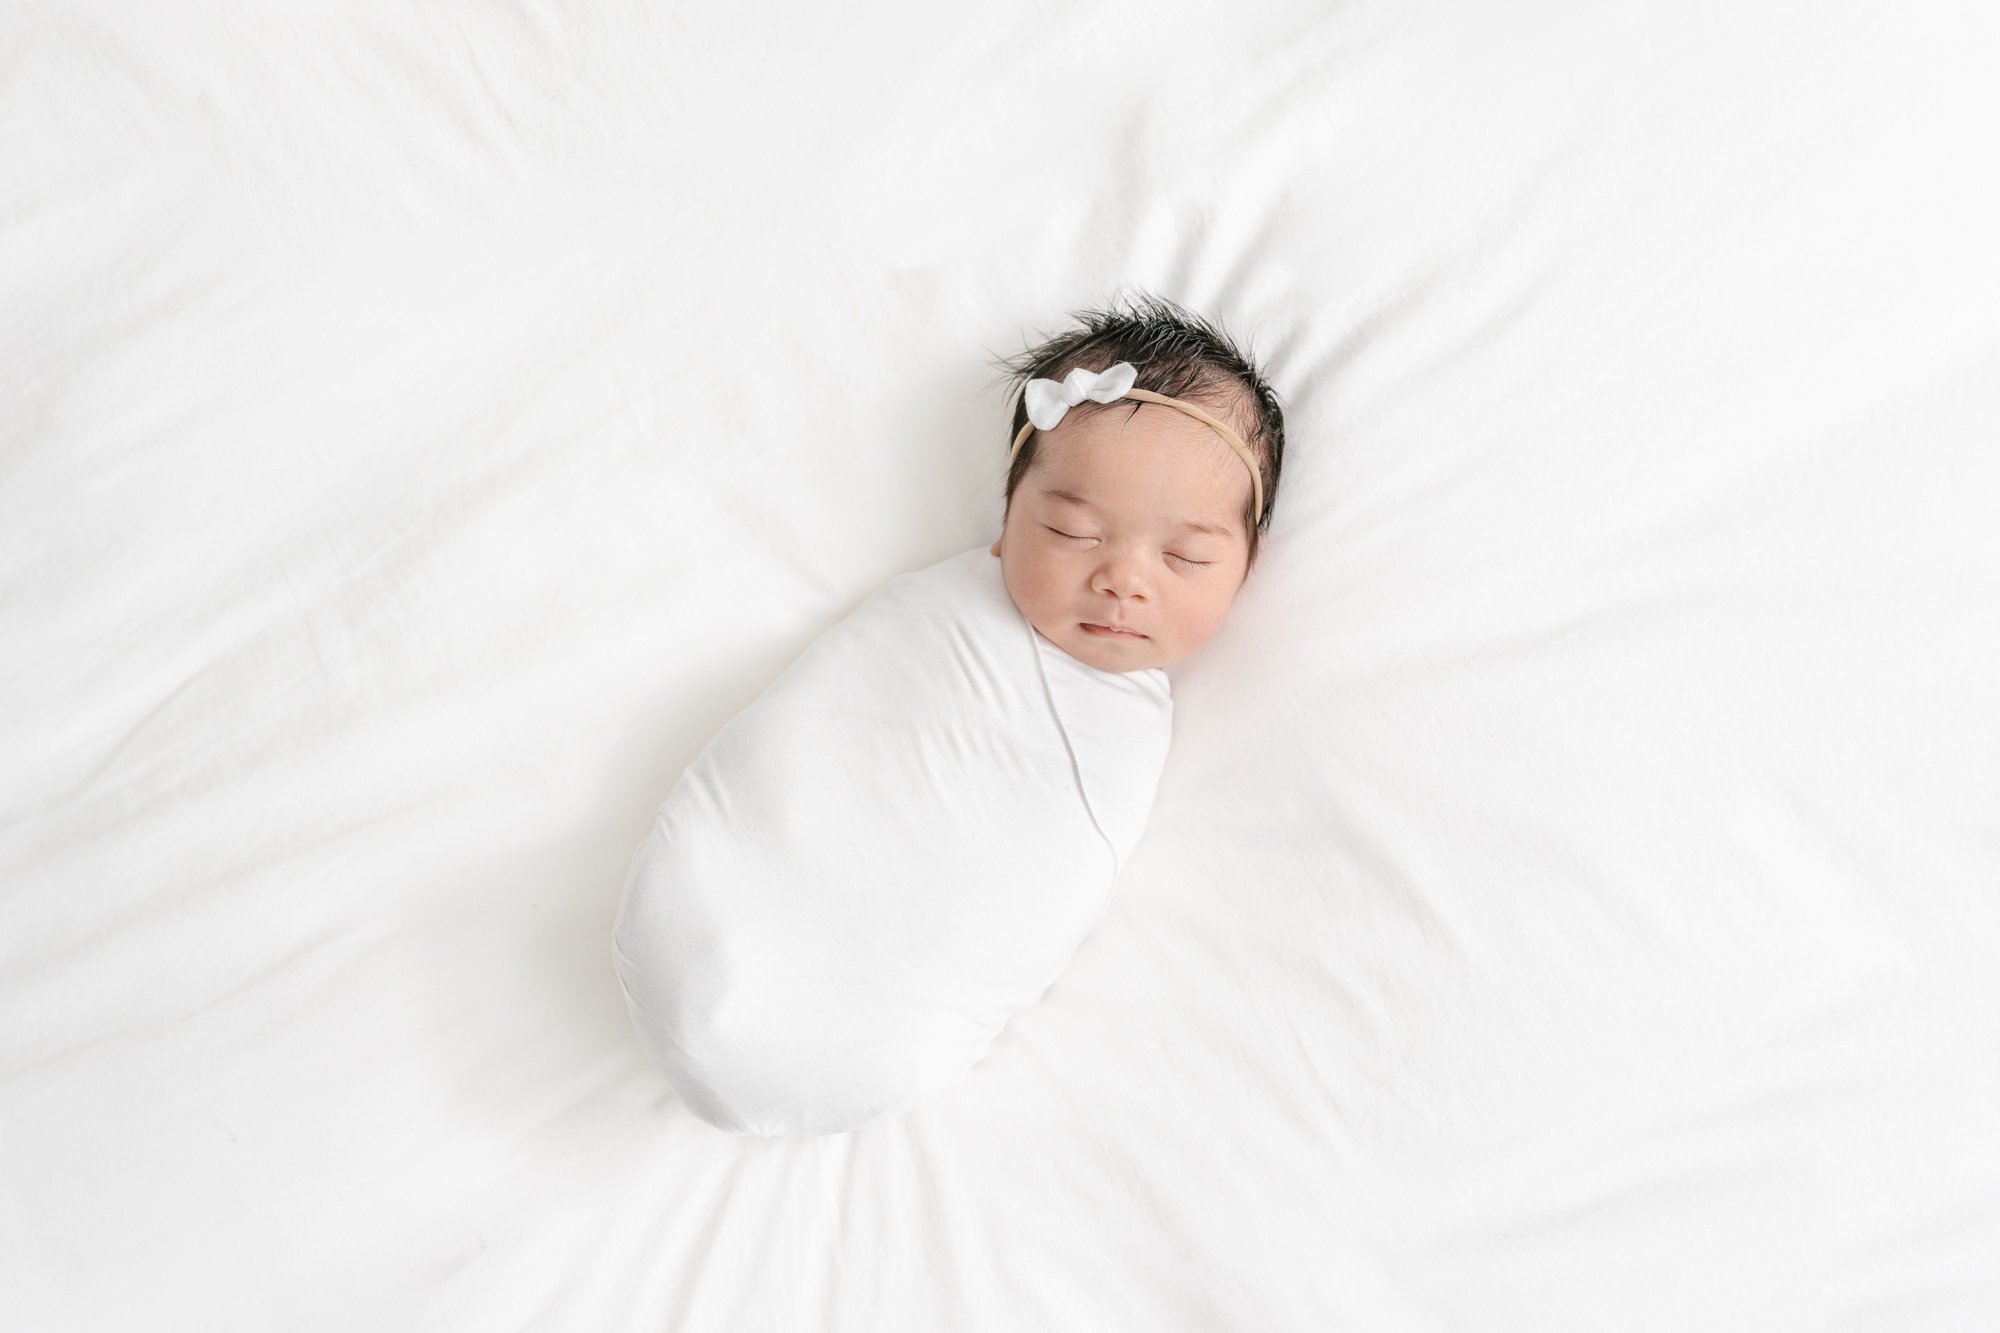  Sweet photograph of a newborn baby girl laying on a bed swaddled in a white gauzy blanket for her in-home newborn session. #newyorkcityphotographer #familyportraits #newbornportraitsession #inhomephotography #familyoffive #familyposeinspo #newjersey